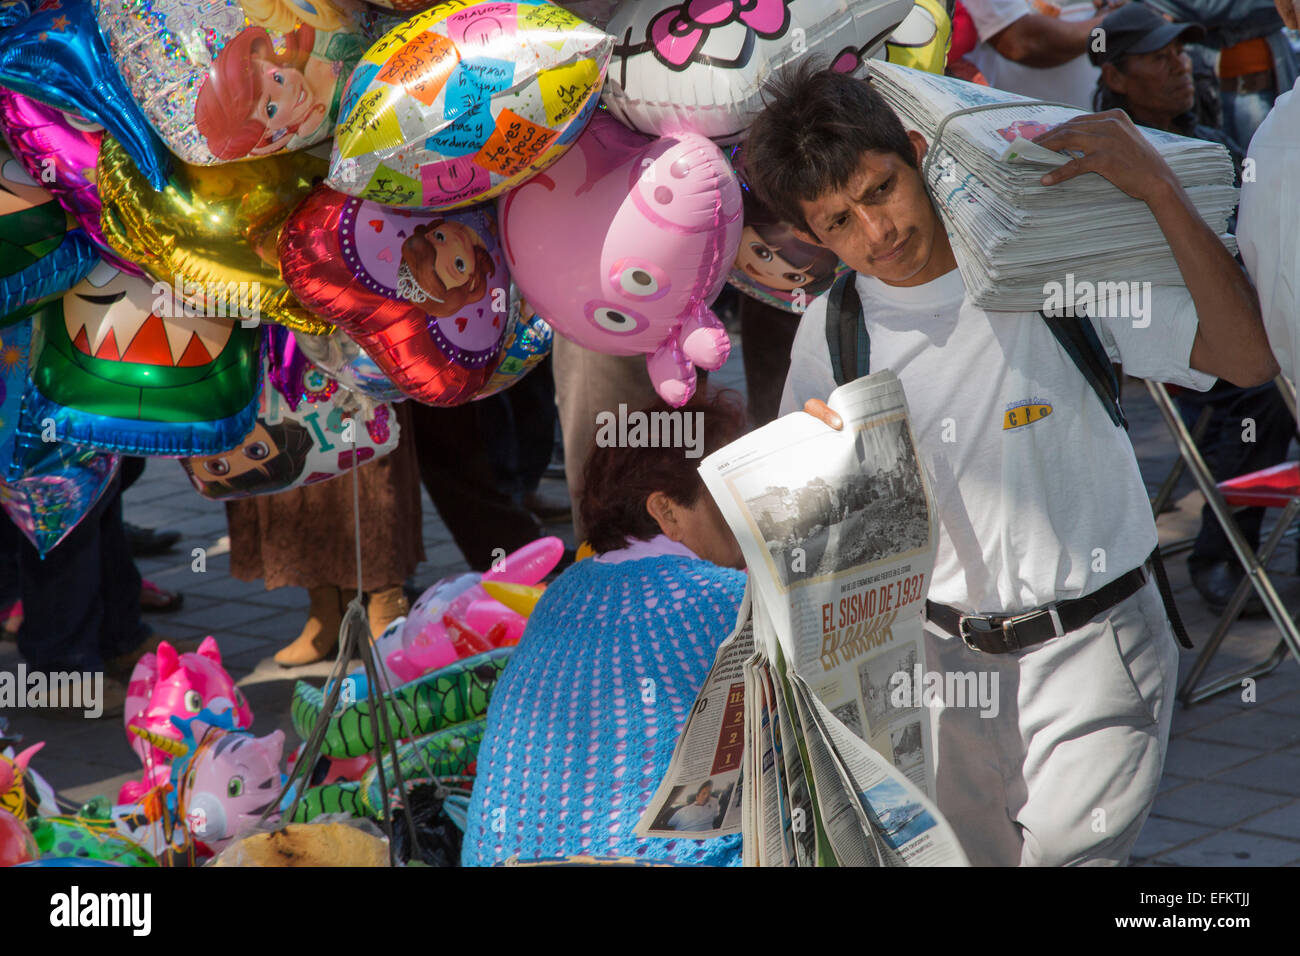 Oaxaca, Mexico - A man selling newspapers in the zócalo (central square) walks past a woman selling balloons. Stock Photo